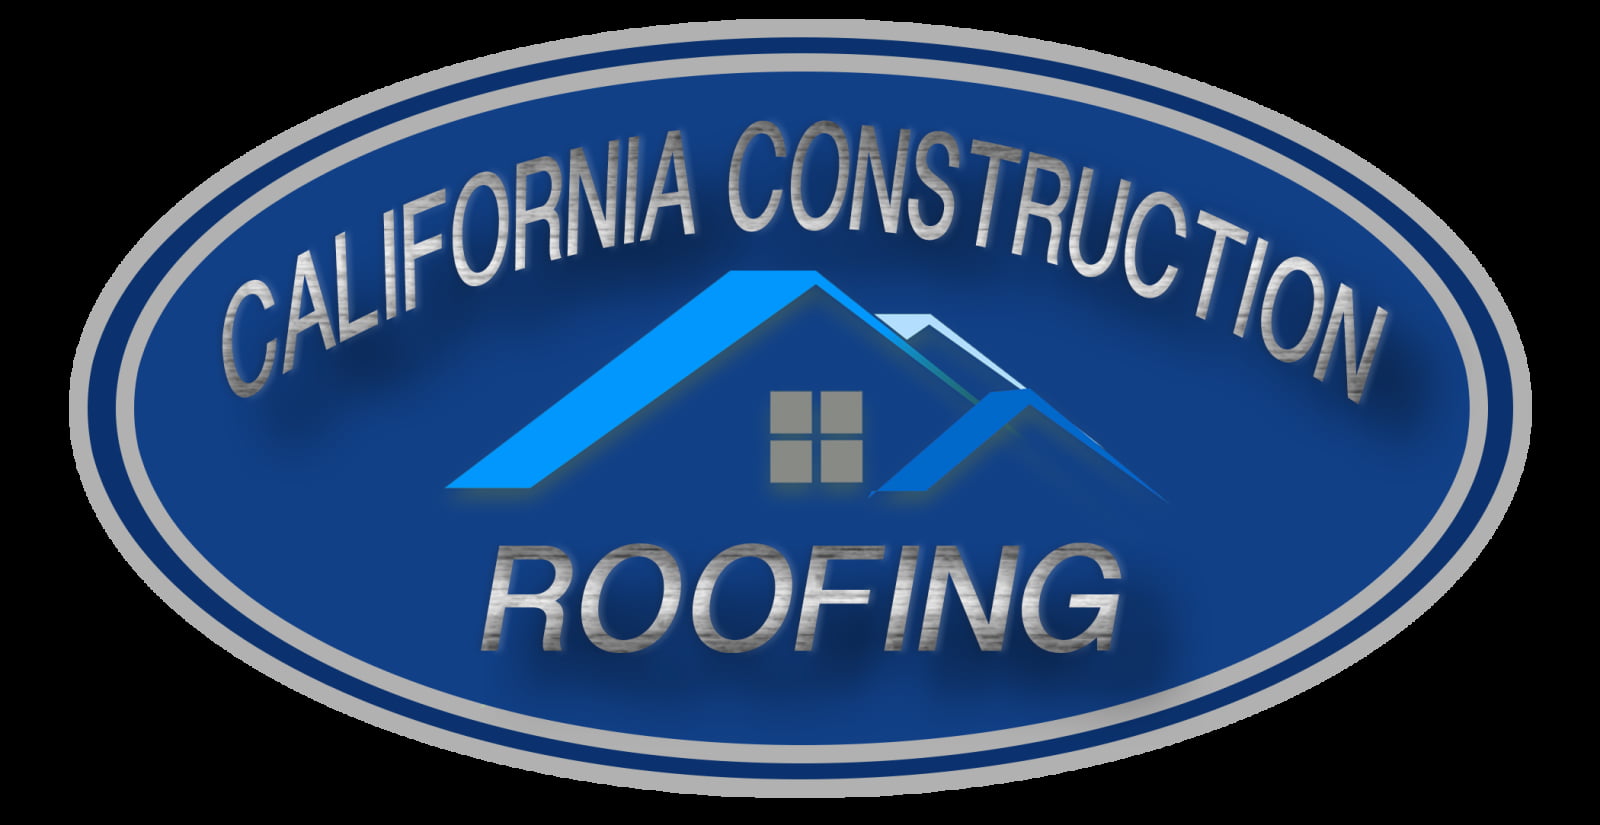 California Construction & Roofing roofing company in California